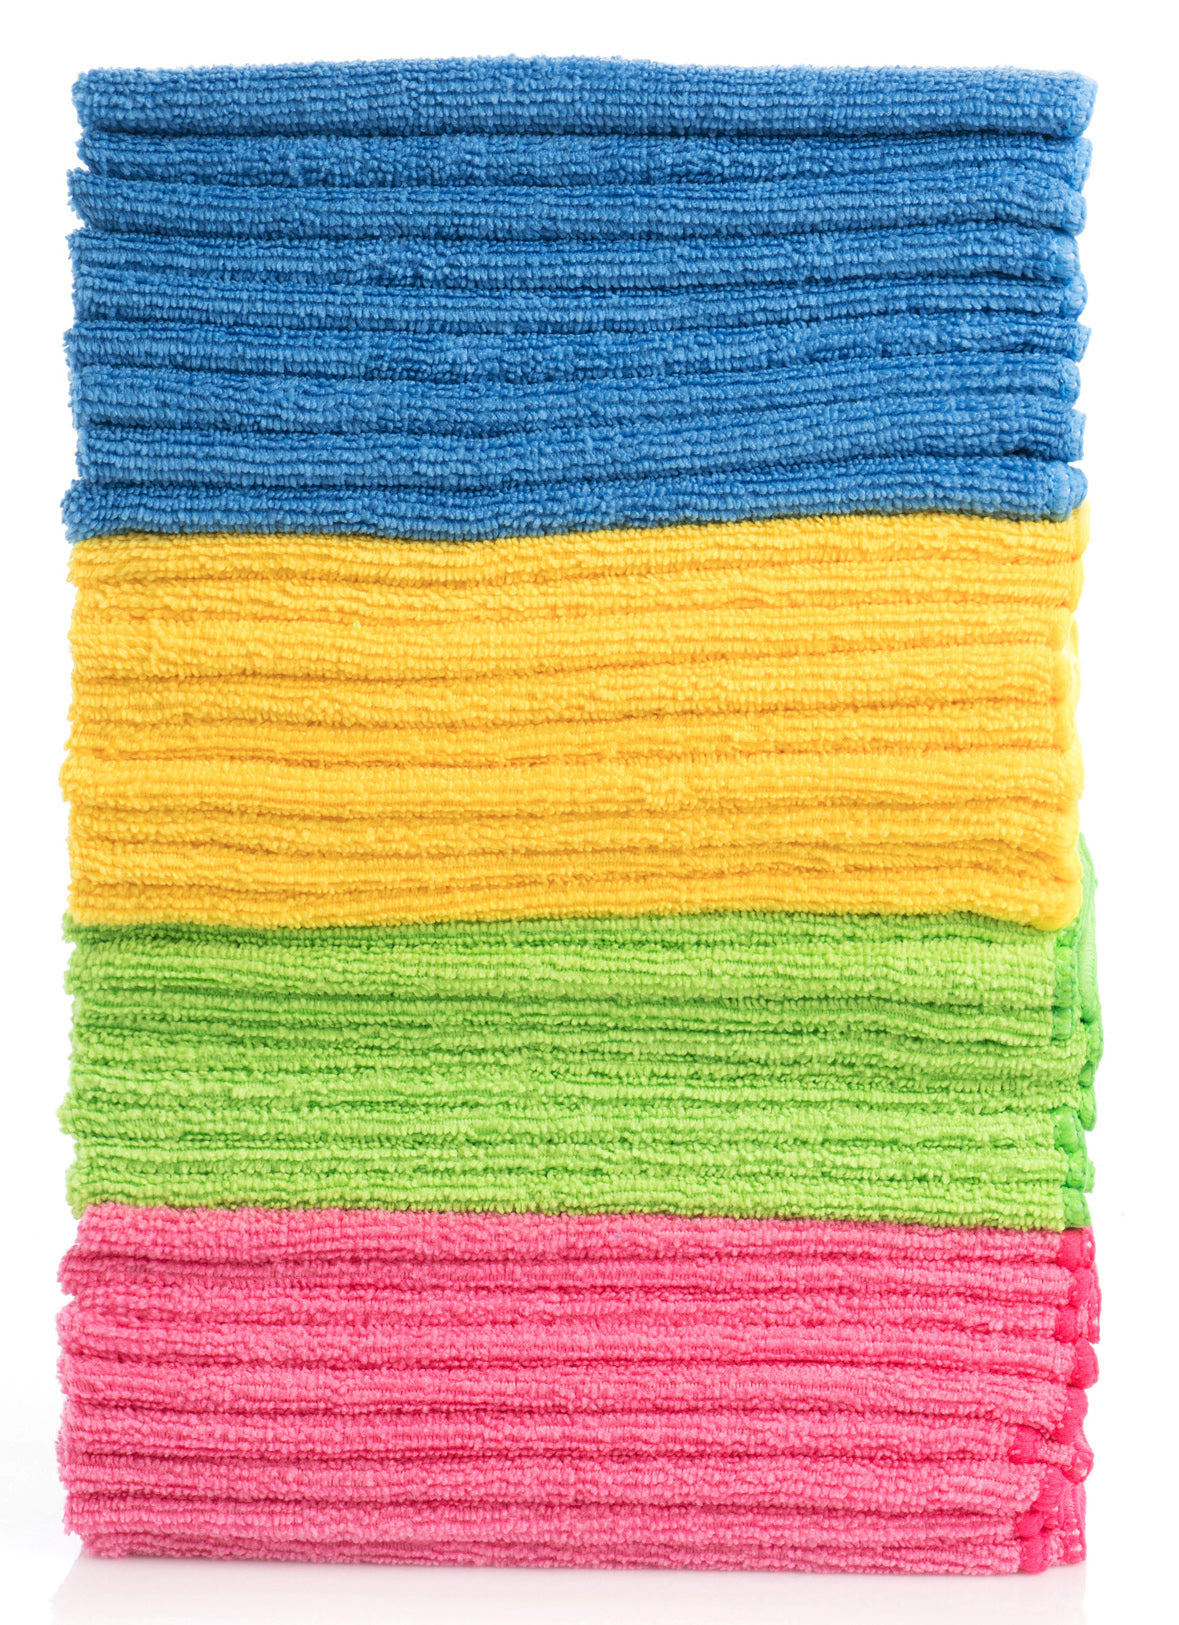 Microfiber Cleaning Cloths (Case of 48)